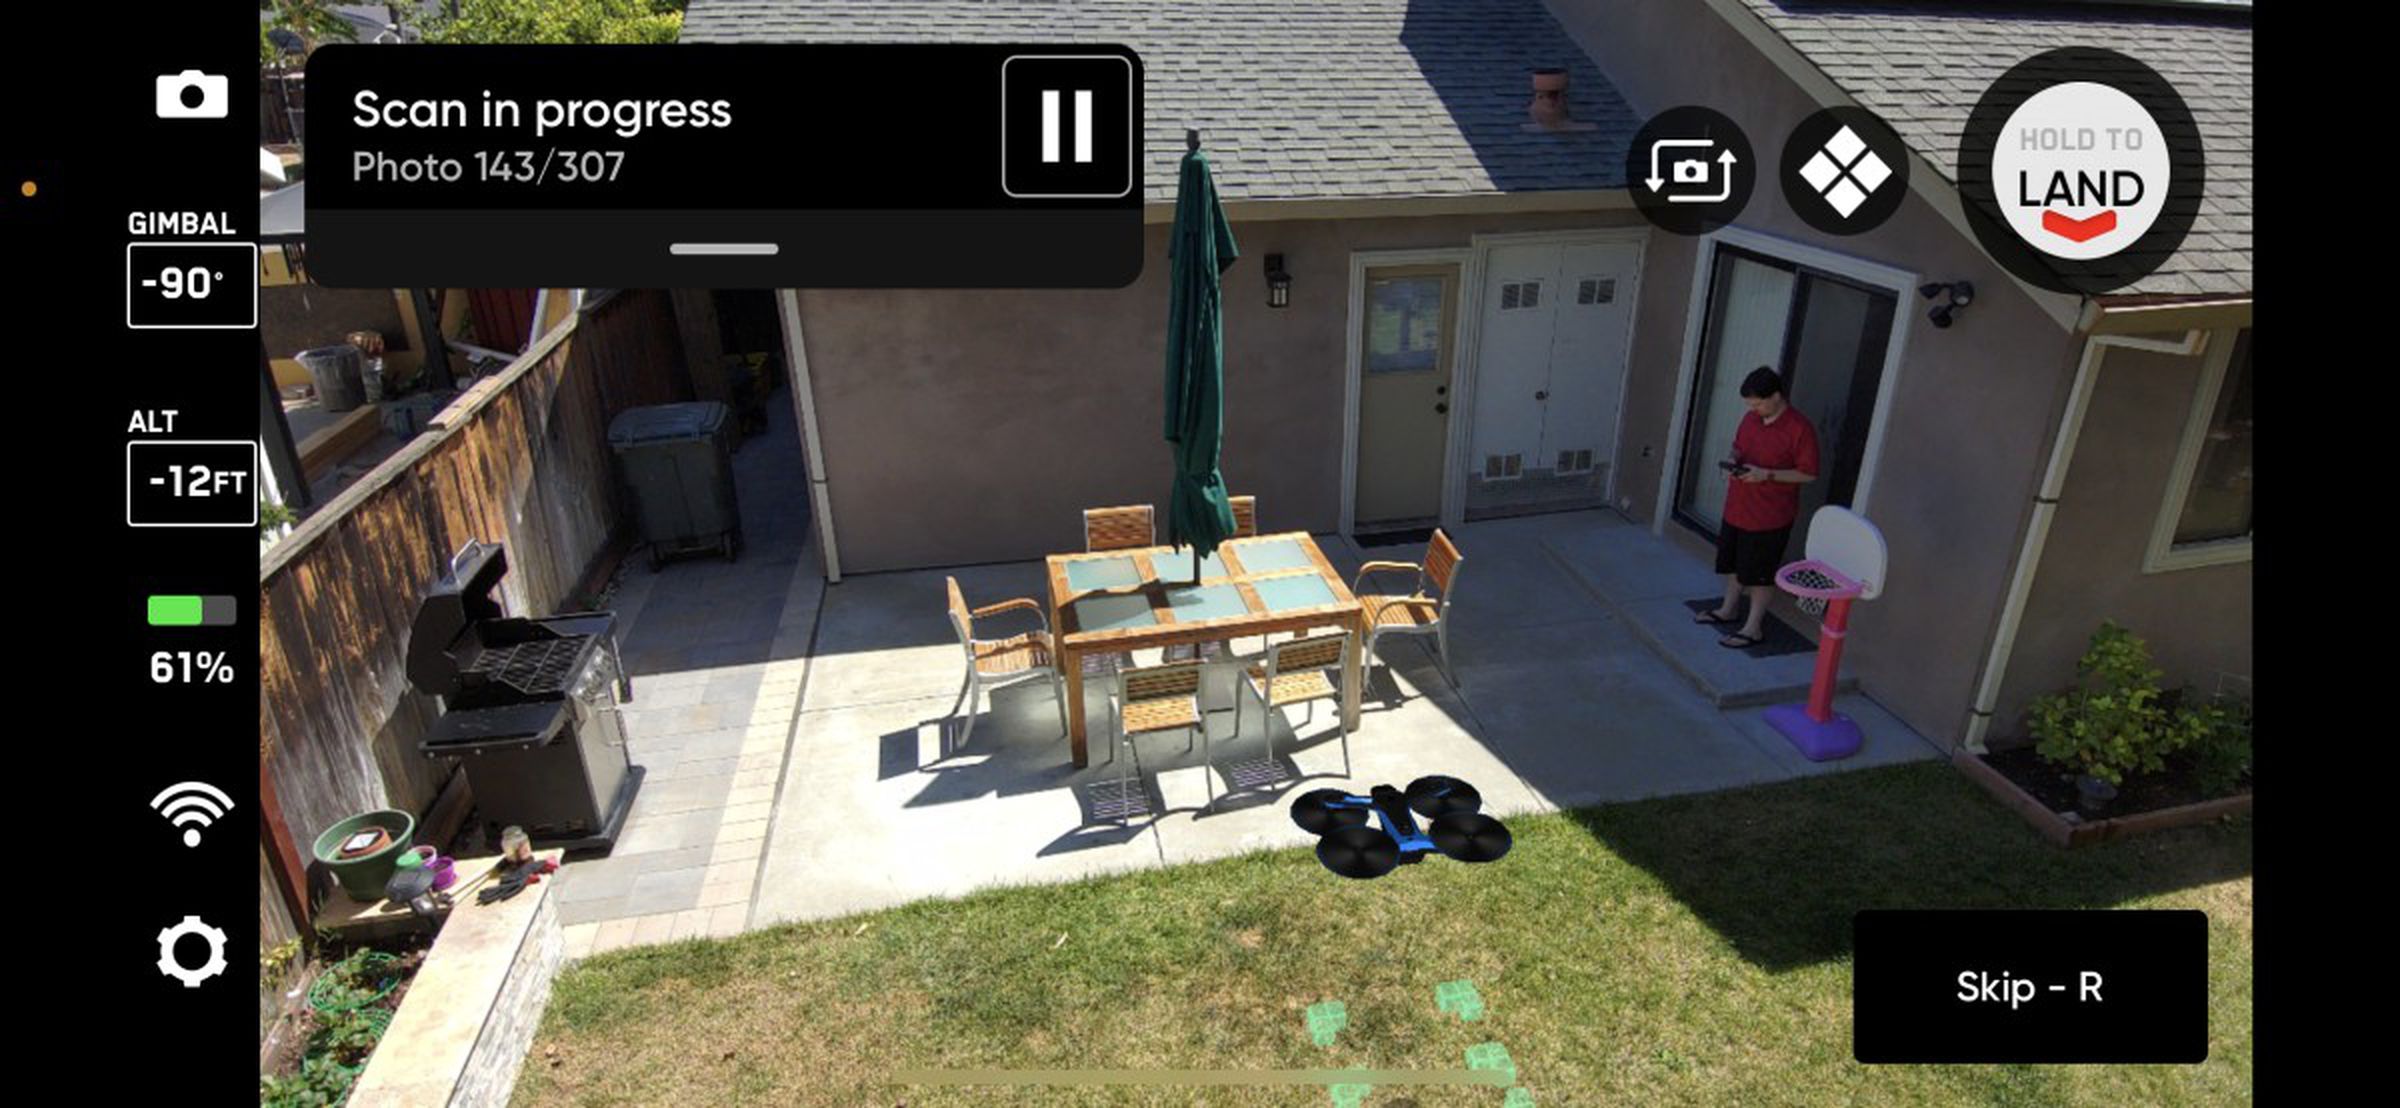 There’s an AR mode where you can keep track of a virtual Skydio drone as it makes its rounds.